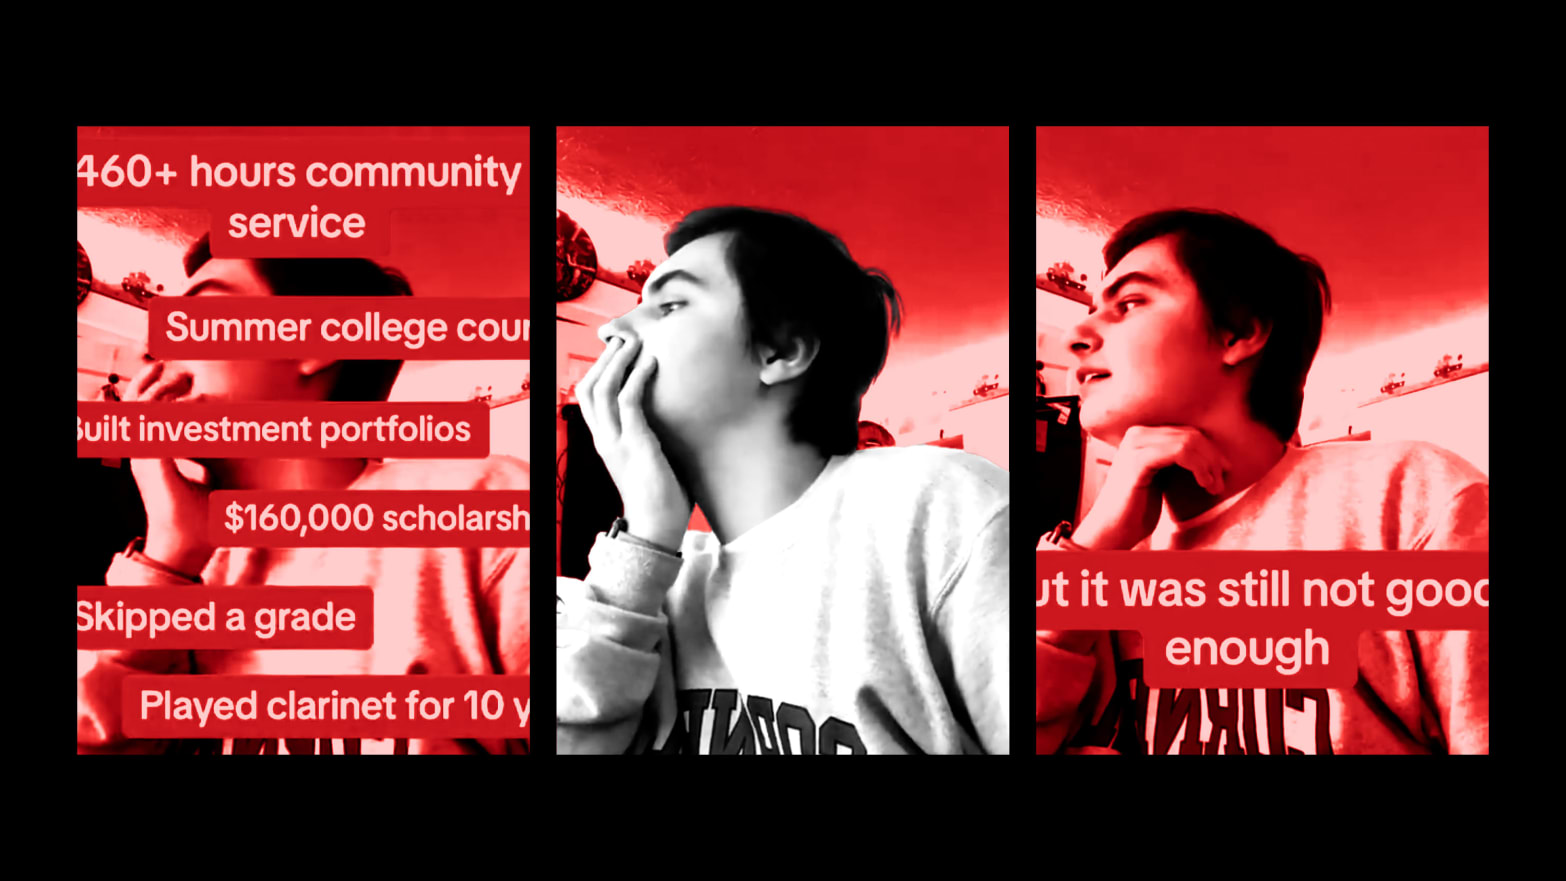 John Haag’s Tik Tok video of his Cornell Rejection